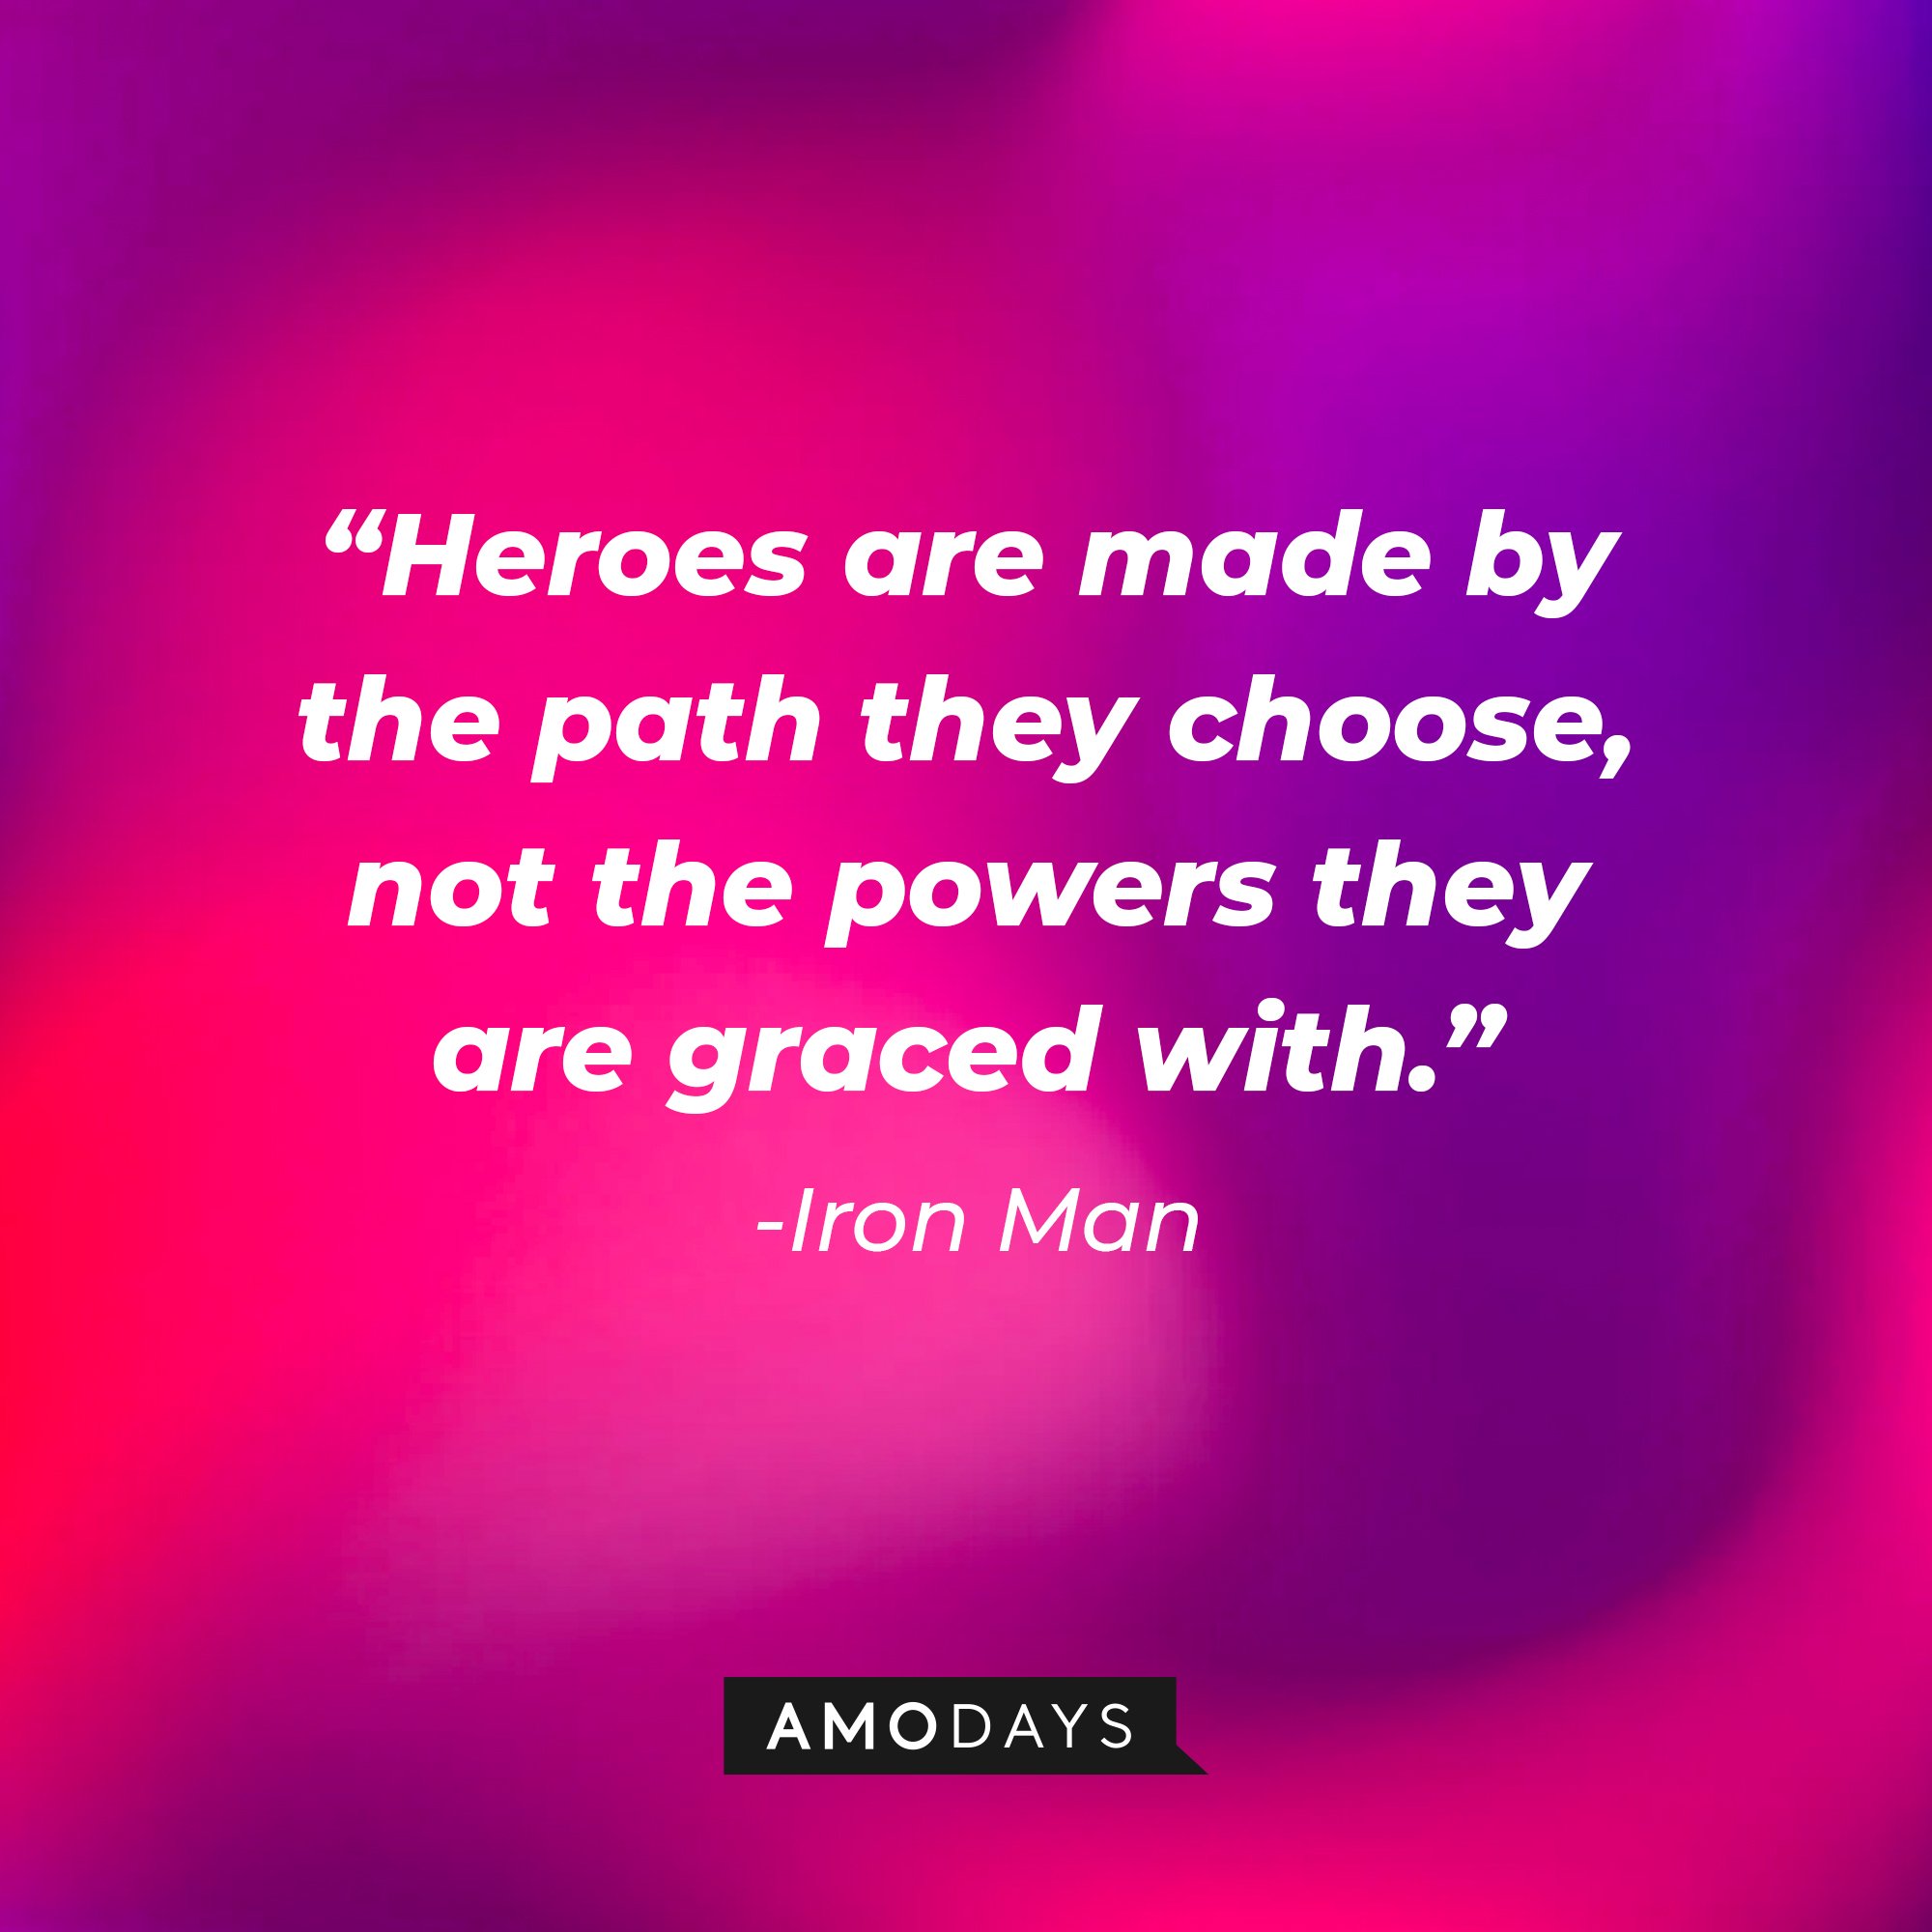 Iron Man's quote: “Heroes are made by the path they choose, not the powers they are graced with.” | Image: AmoDays